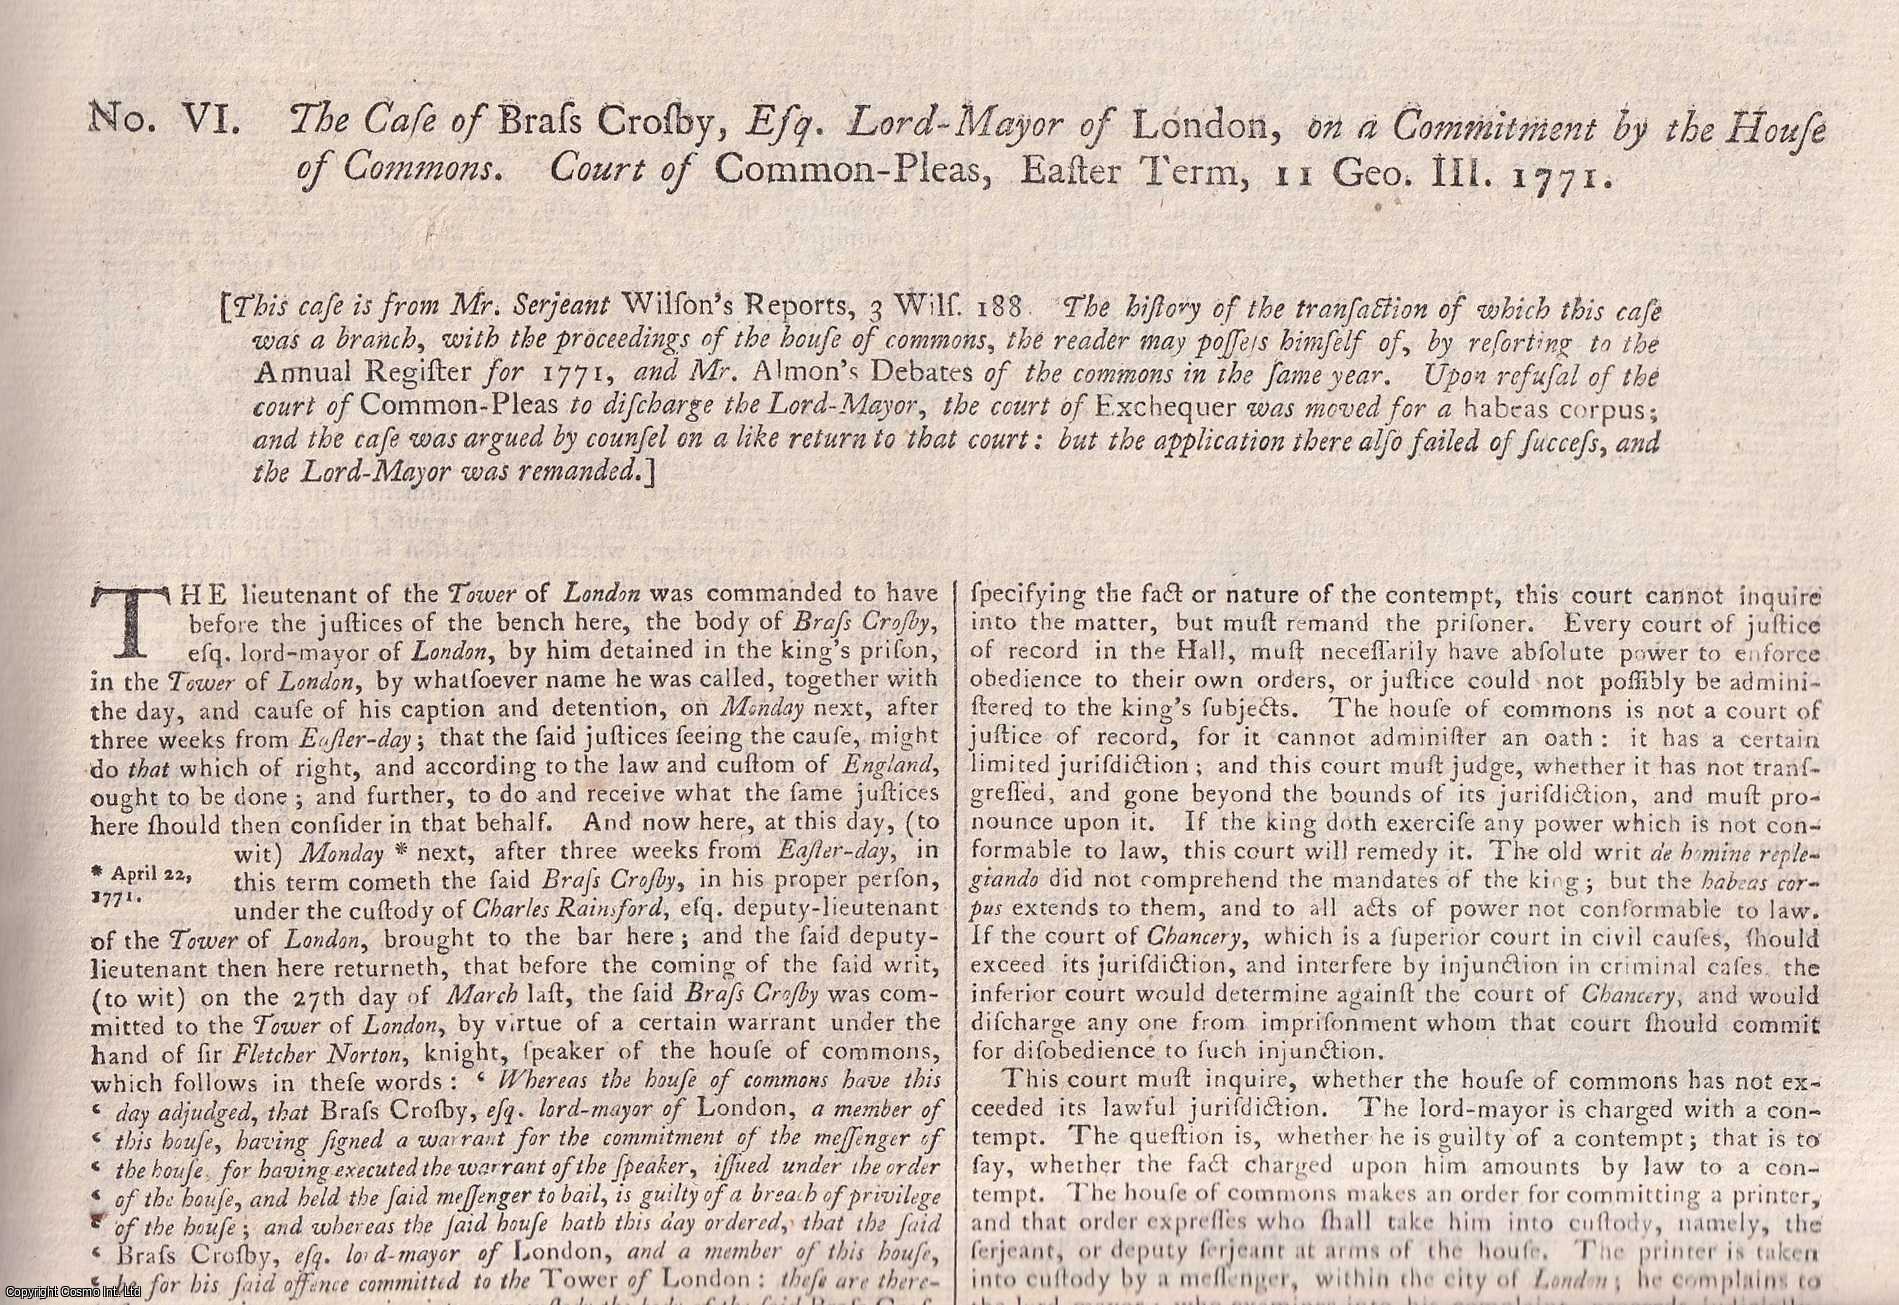 [Trial] - HABEAS CORPUS, 1771. The Case of Brass Crosby, Esq. Lord Mayor of London, on a Commitment by the House of Commons. Court of Common Pleas, 1771. An original article from the Collected State Trials.